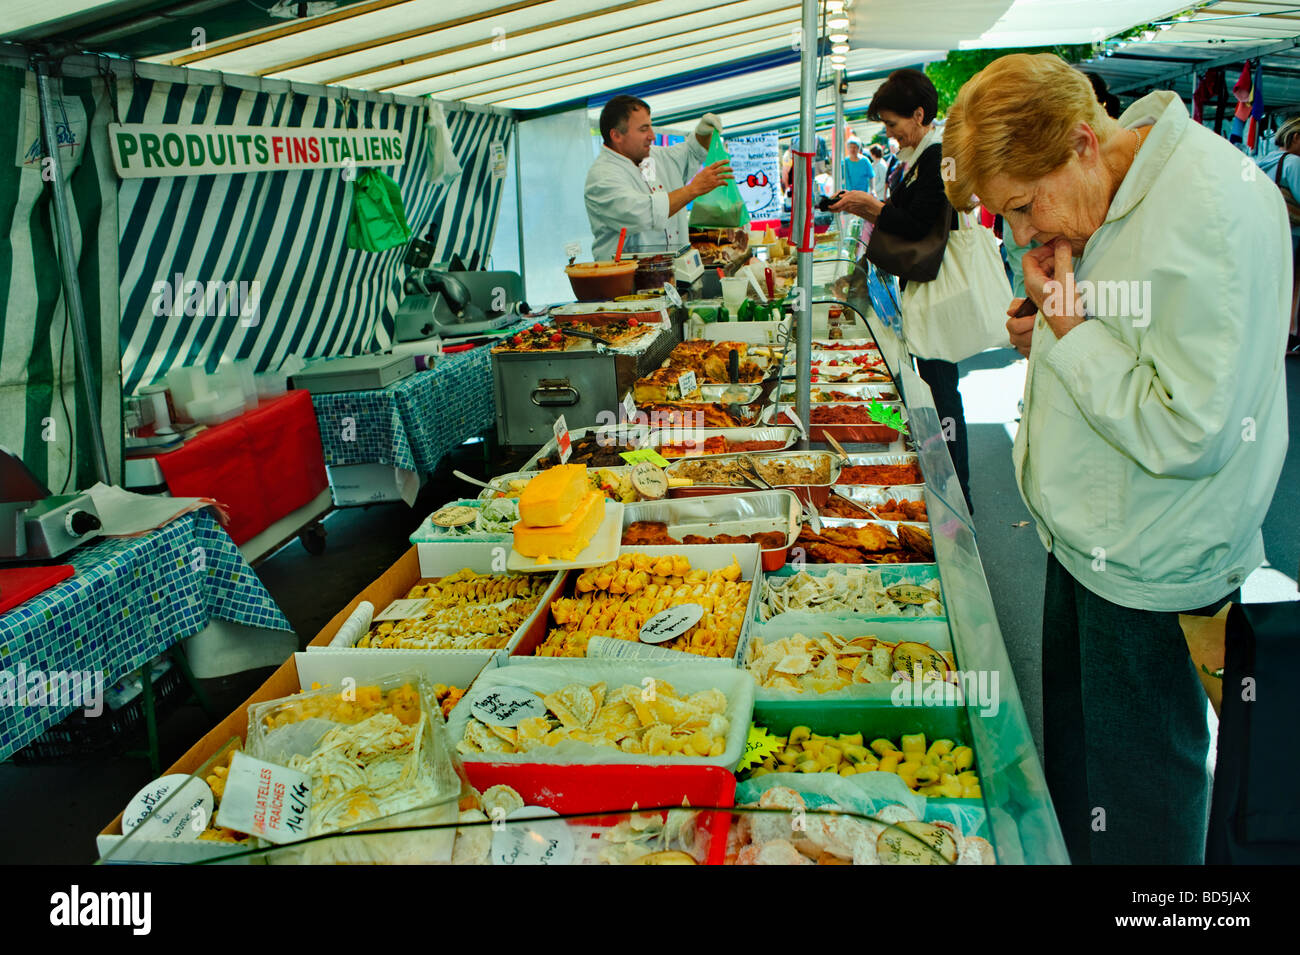 Paris France, Senior Woman Shopping Outside Public Food Markets 'Italian Food' Stall, Display food prices Stock Photo